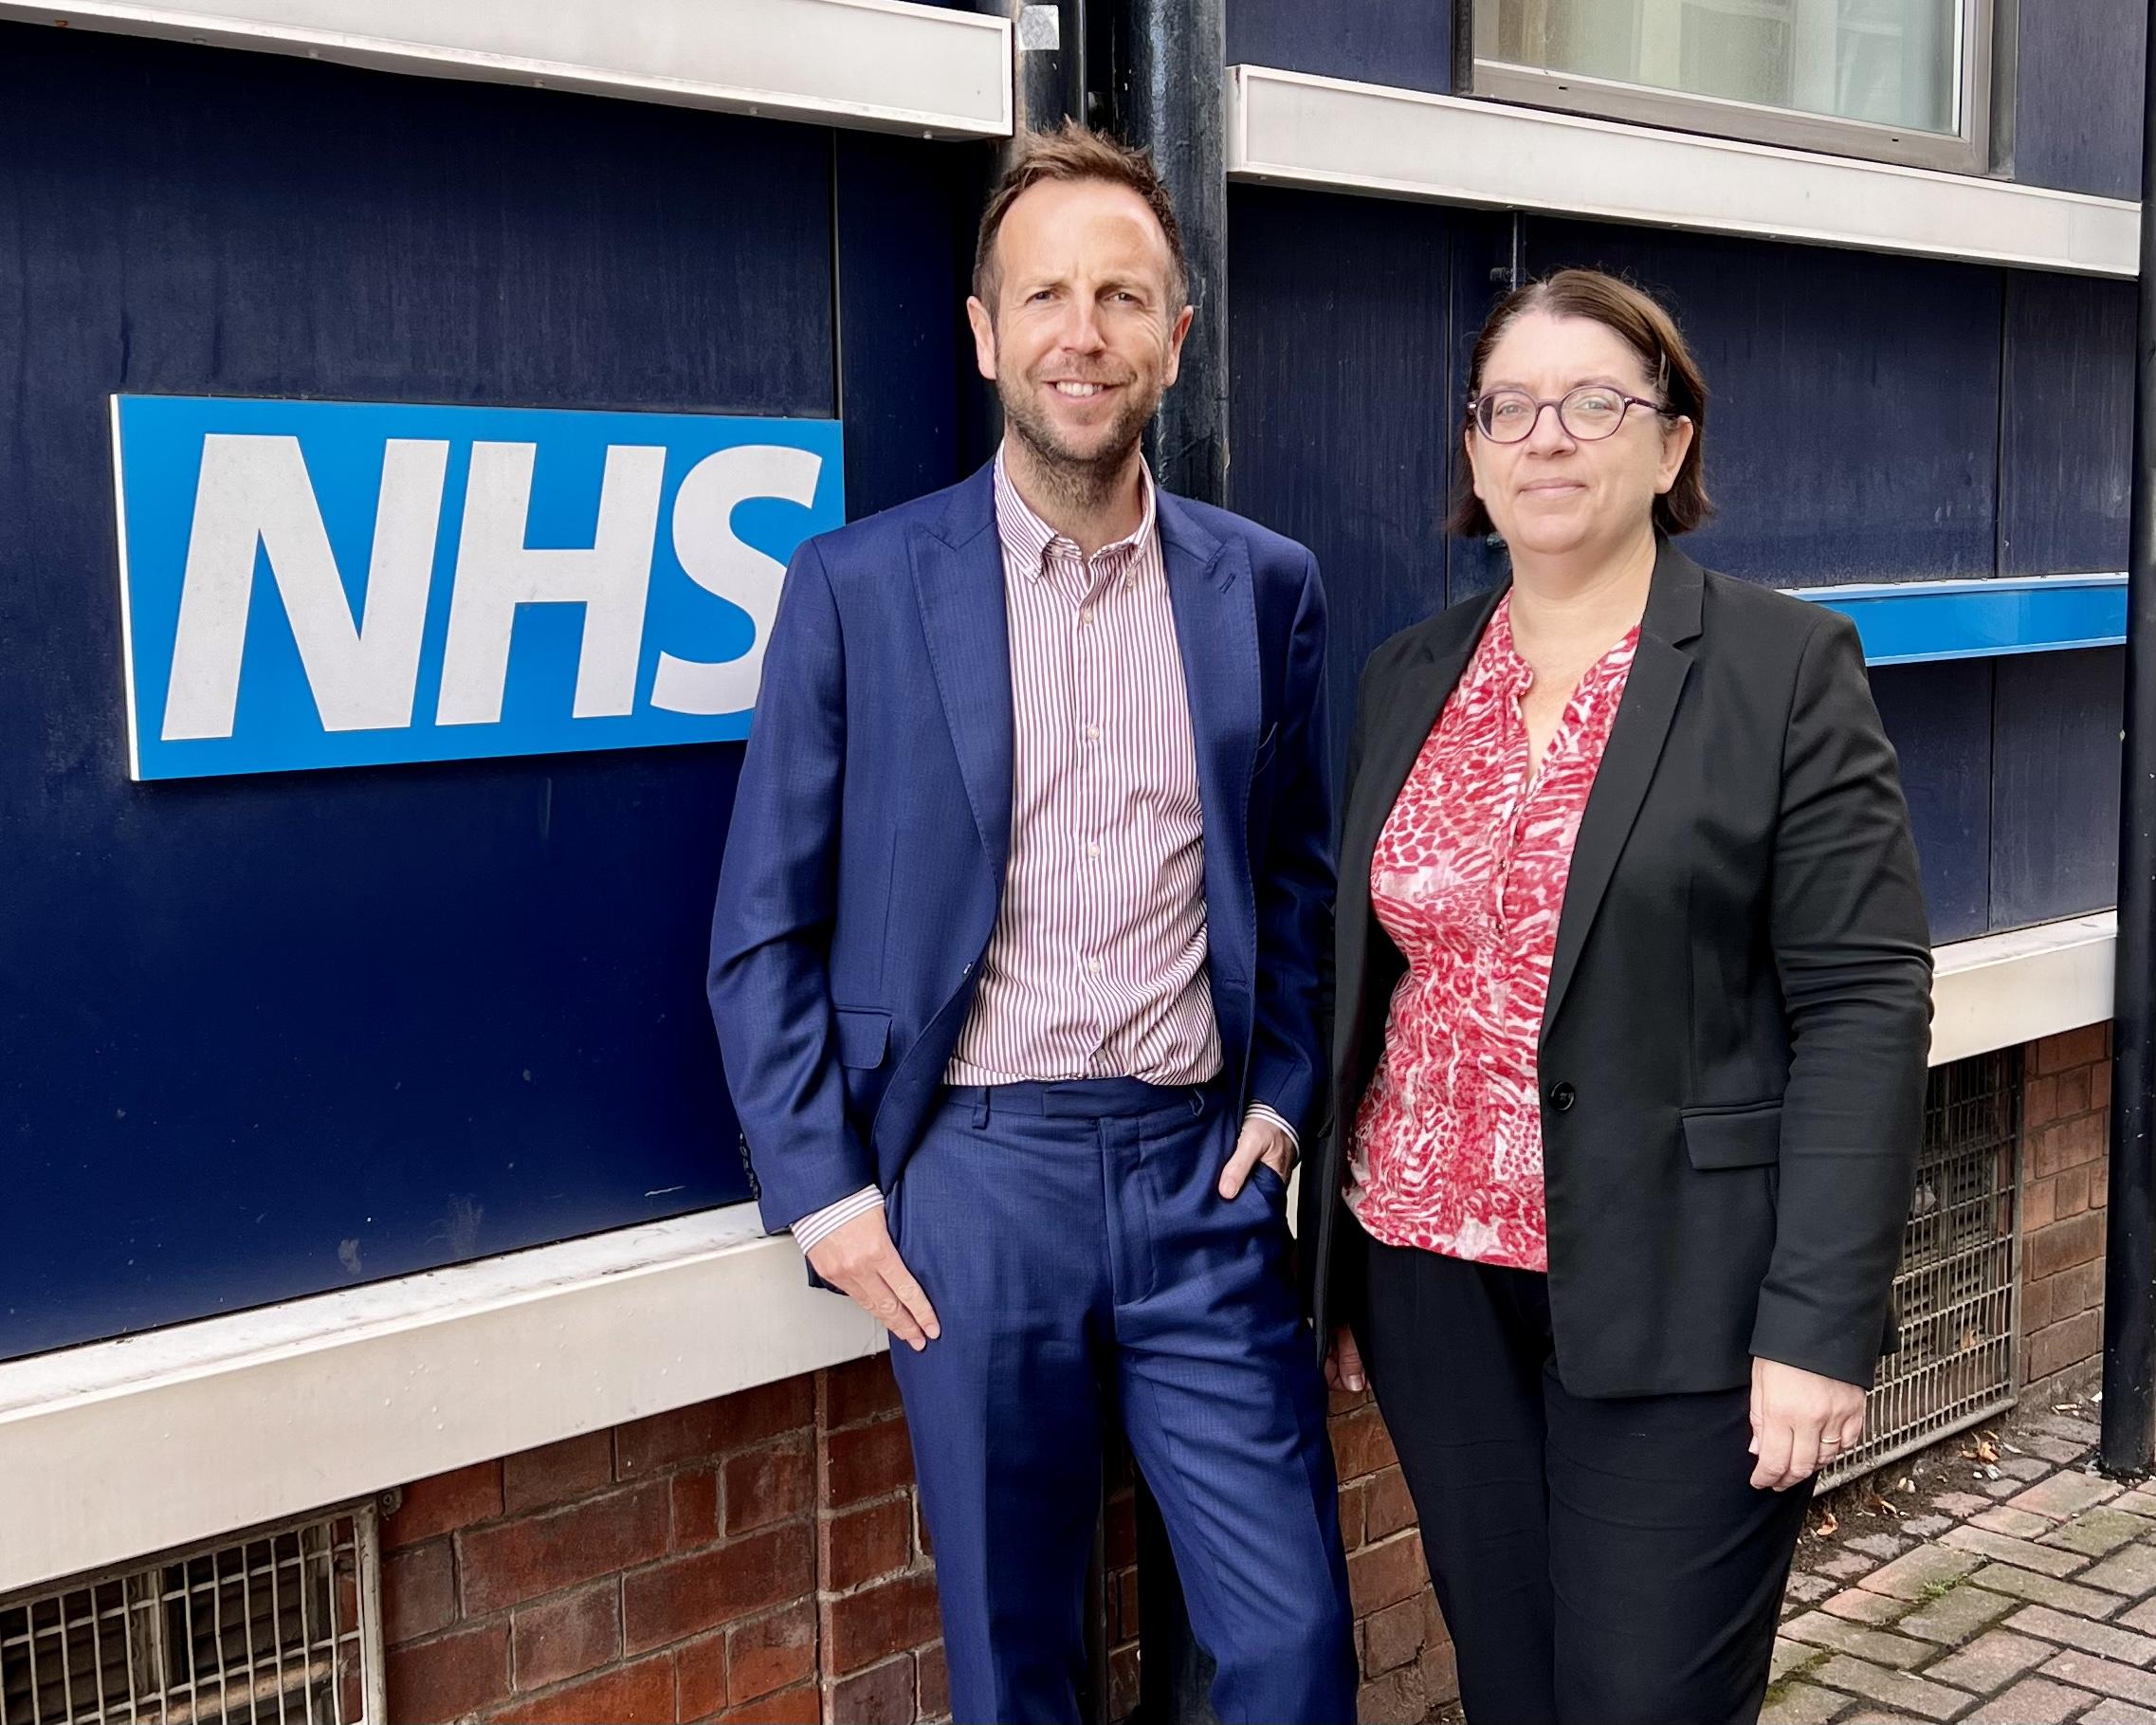 Cllr Ben Miskell and Cllr Ruth Milson outside an NHS clinic